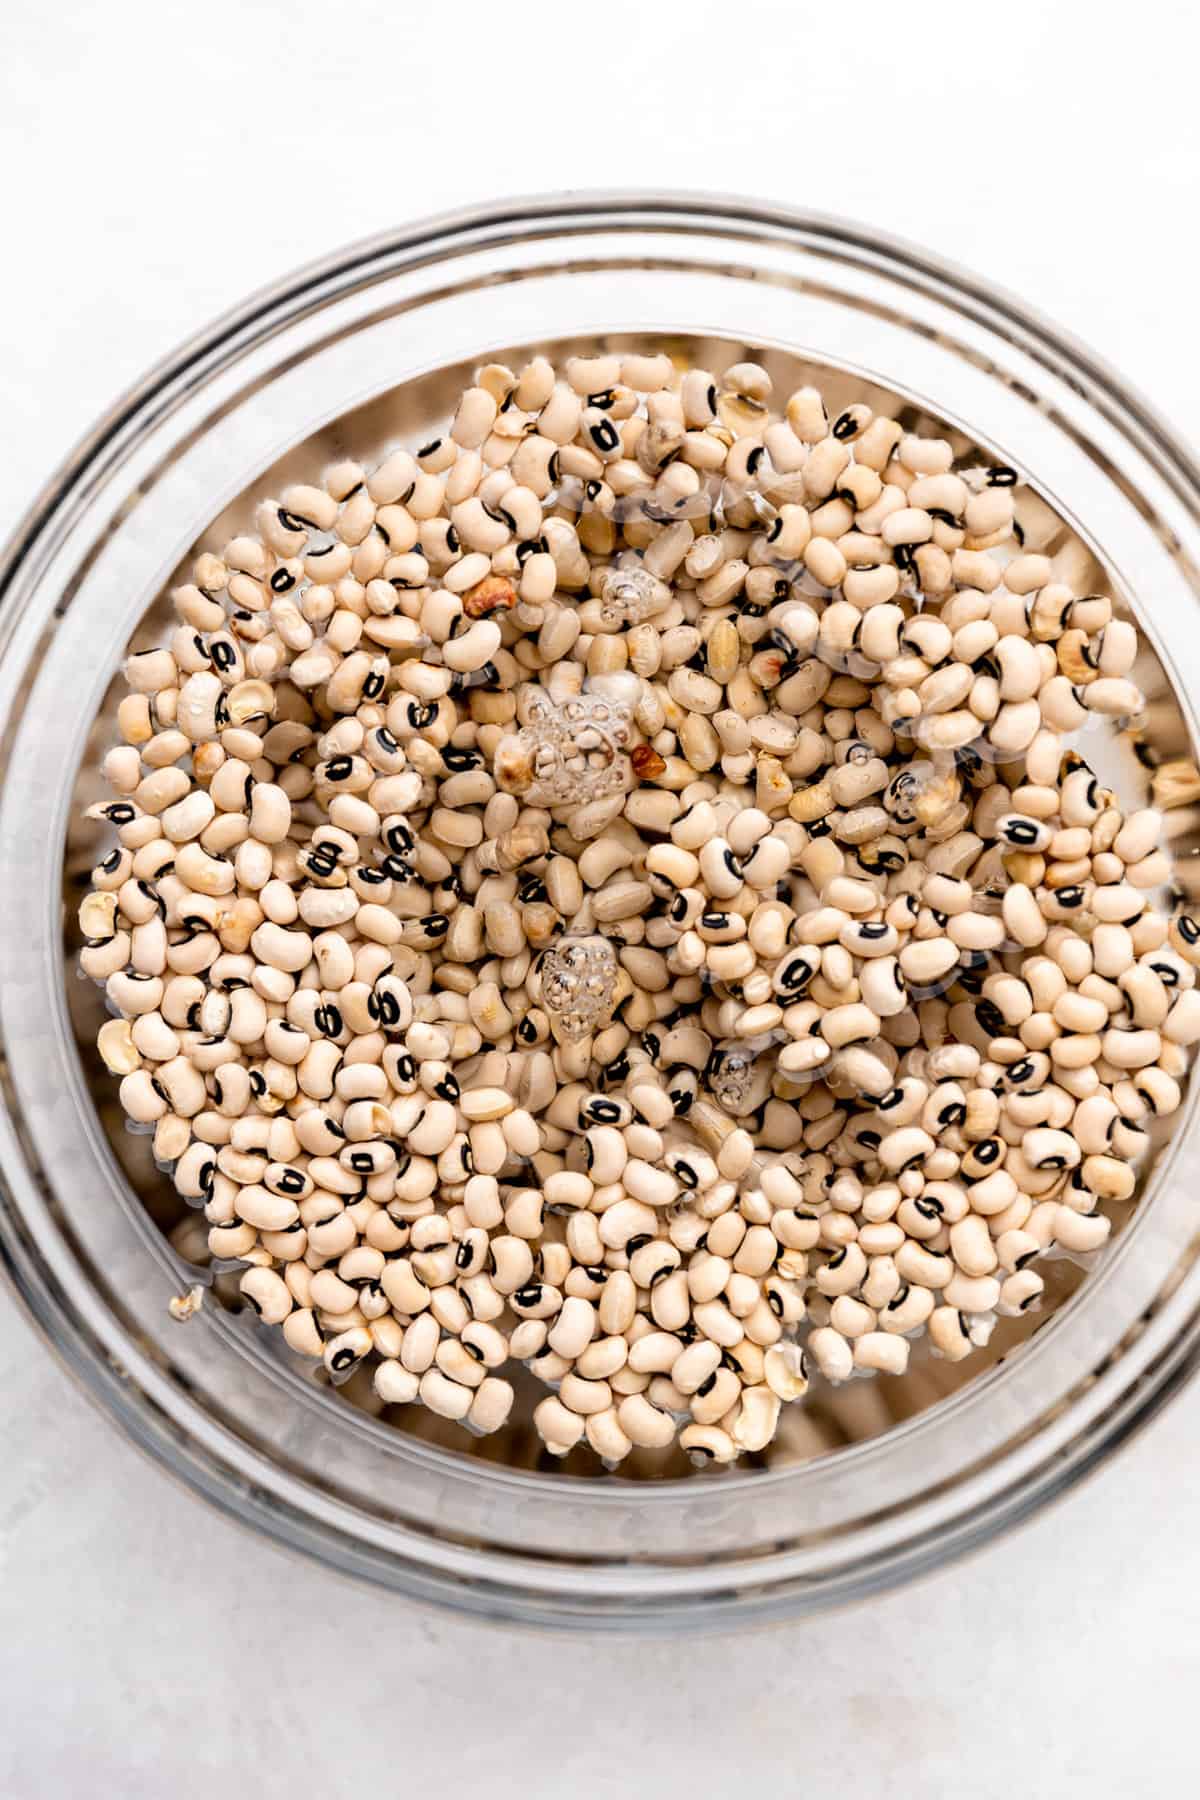 Black eyed peas soaking in a bowl of water. 